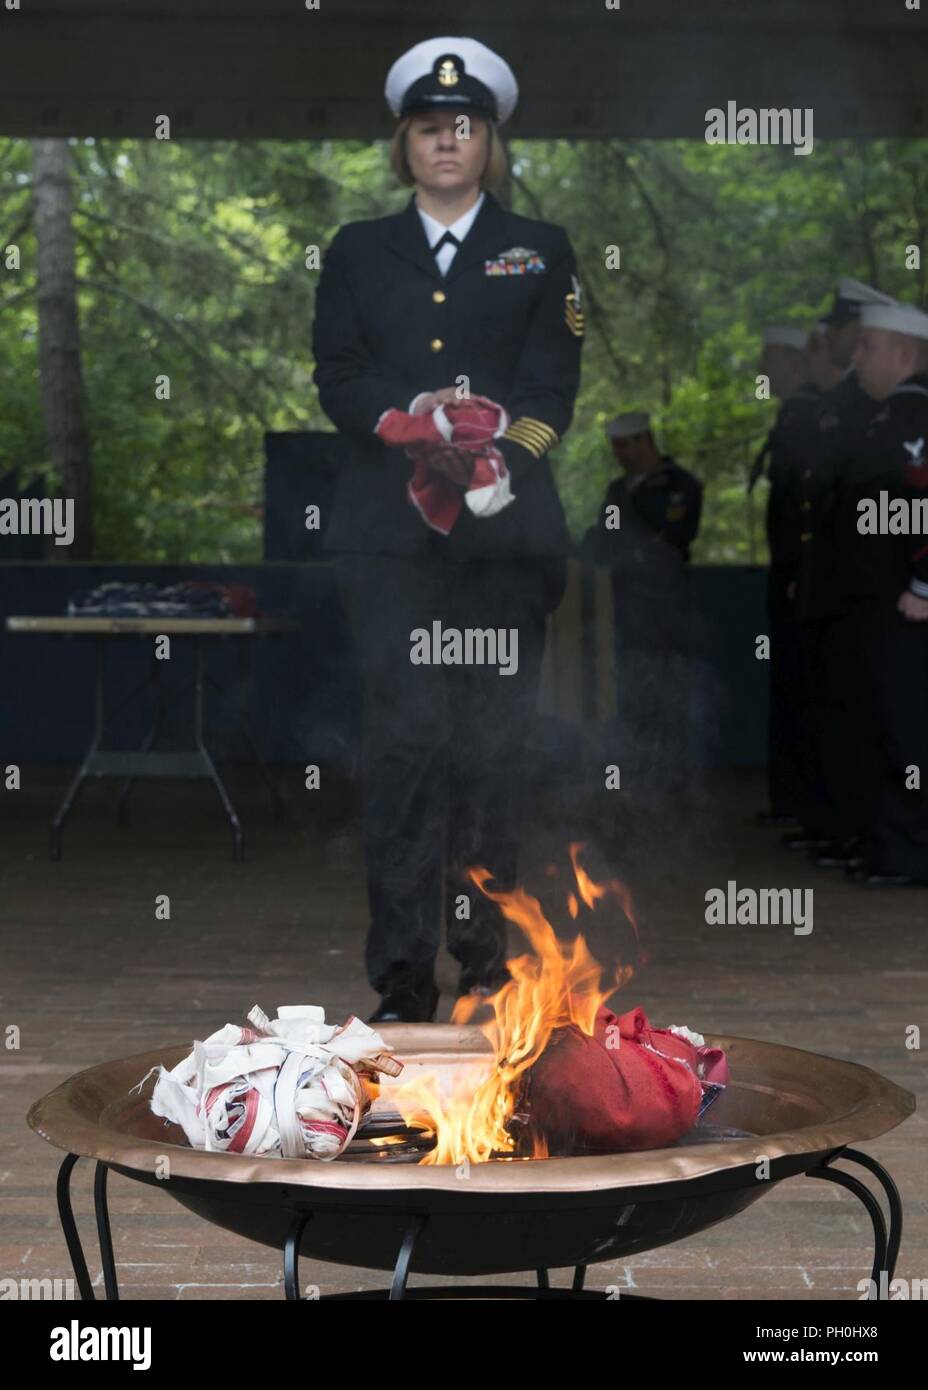 BANGOR, Wash. (June 14, 2018) Chief Hospital Corpsman Farrah Ocasio, from Detroit, Michigan, assigned to Trident Training Facility in Bangor, Wash., walks the remains of a U.S. flag to a fire during a flag retirement ceremony at Naval Base Kitsap - Bangor. When a U.S. flag becomes worn, torn, faded, or badly soiled, the flag should be retired with the dignity and respect befitting it. The traditional method is to cut the flag into pieces, separating the 13 stripes from canton and incinerating them separately in a respectful manner. Stock Photo